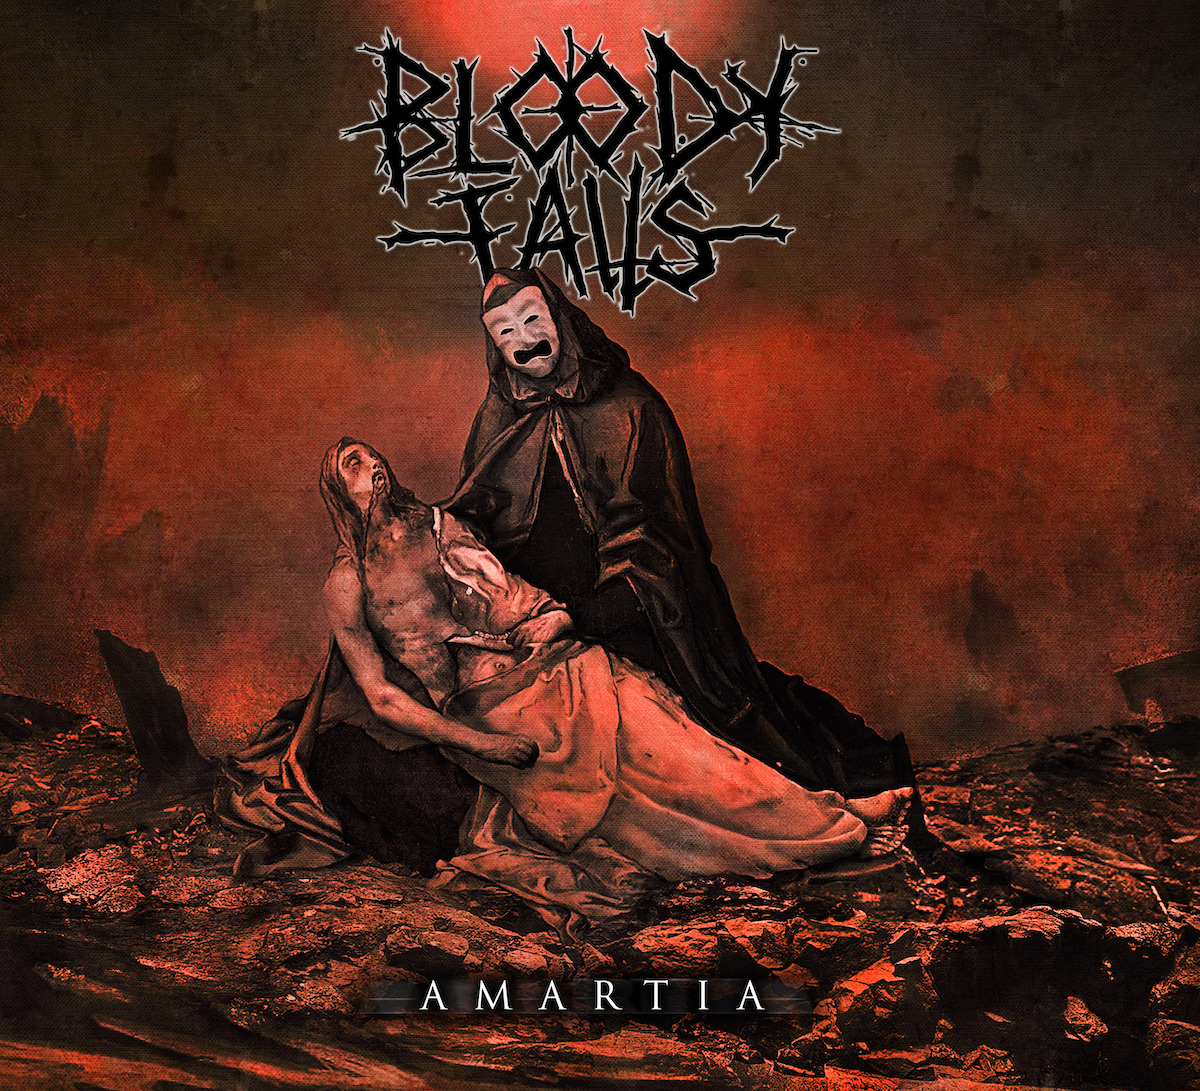 ALBUM REVIEW: Amartia by Bloody Falls